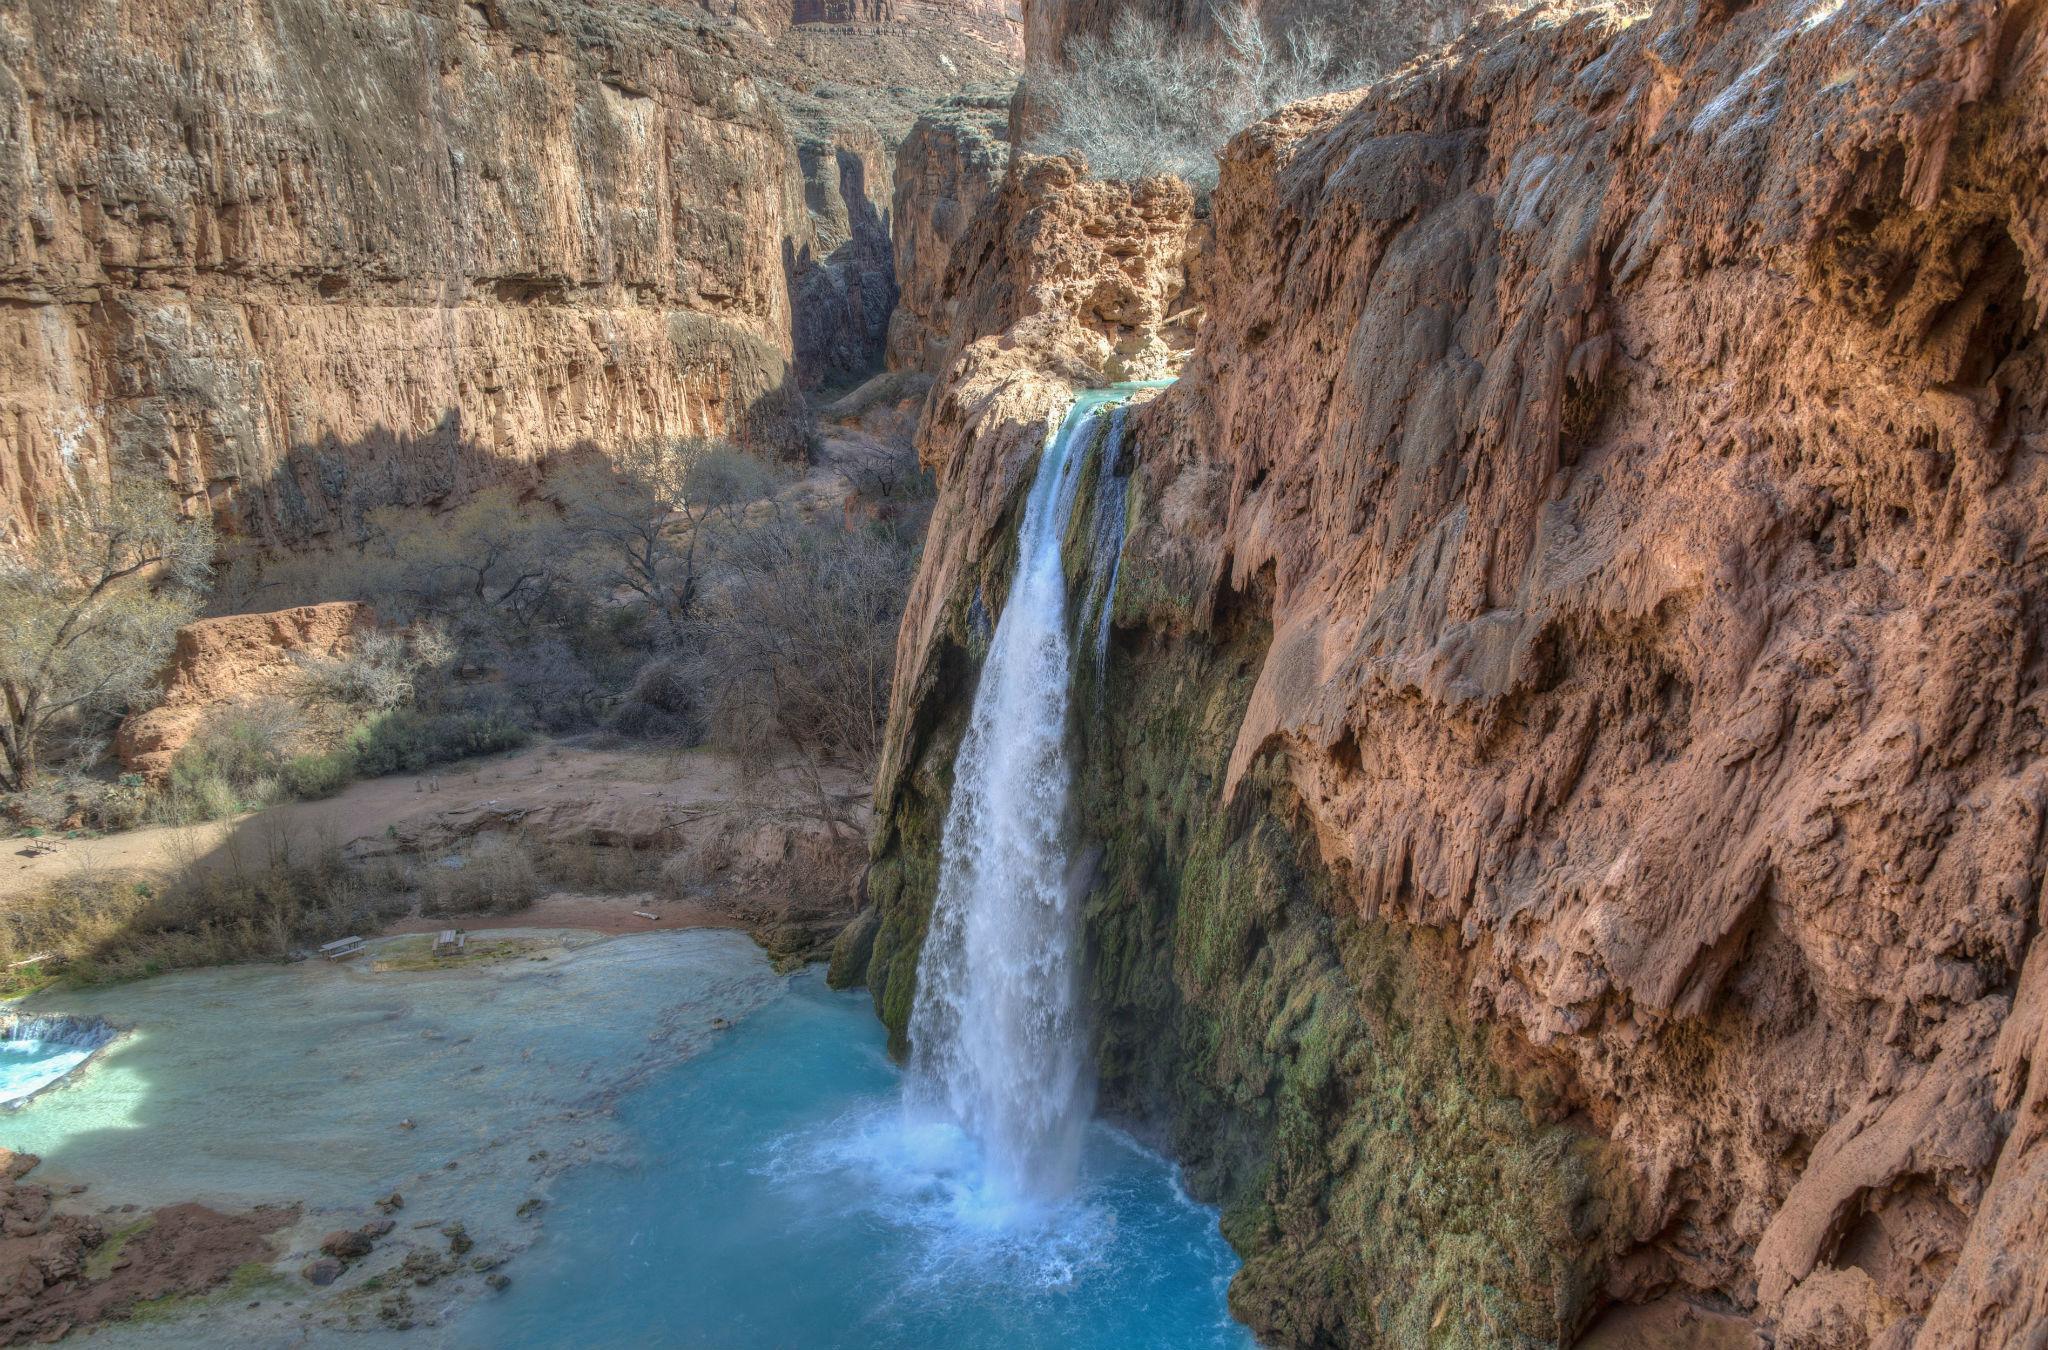 The Havasu Falls attract thousands of tourists to the Havasupai reservation each year, but the tribe is concerned its water could become contaminated by uranium due to nearby mining